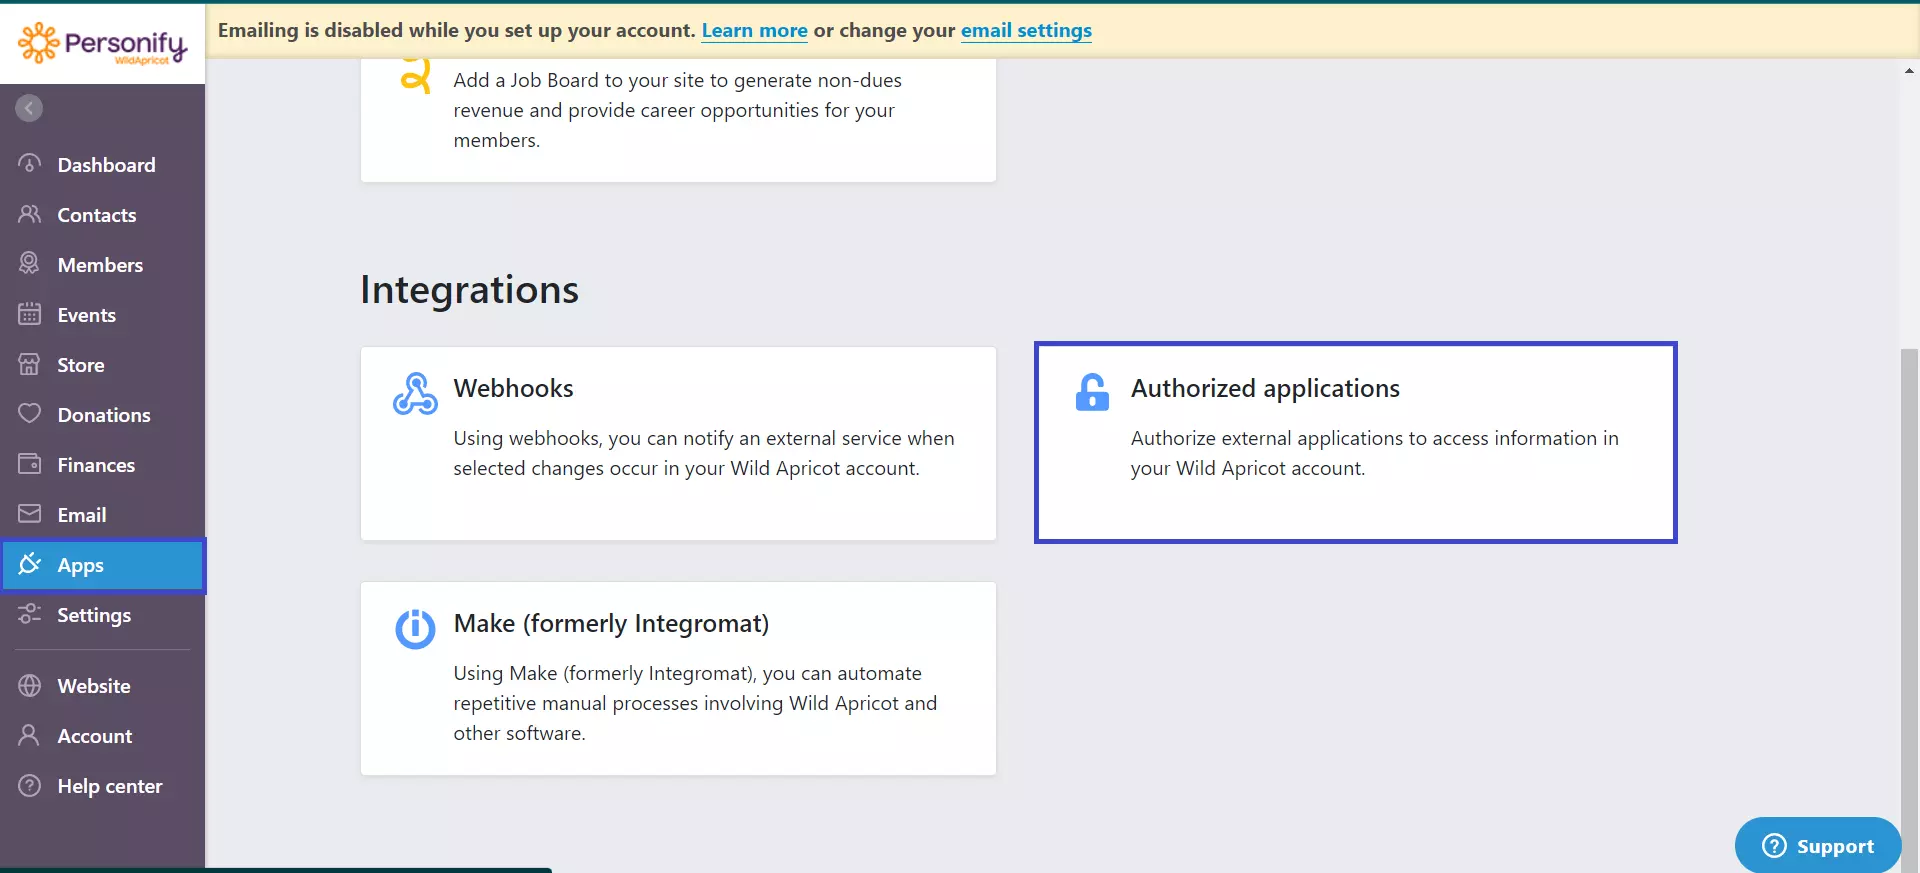 ASP.NET OAuth Middleware using WildApricot as OAuth Server - Authorize Application